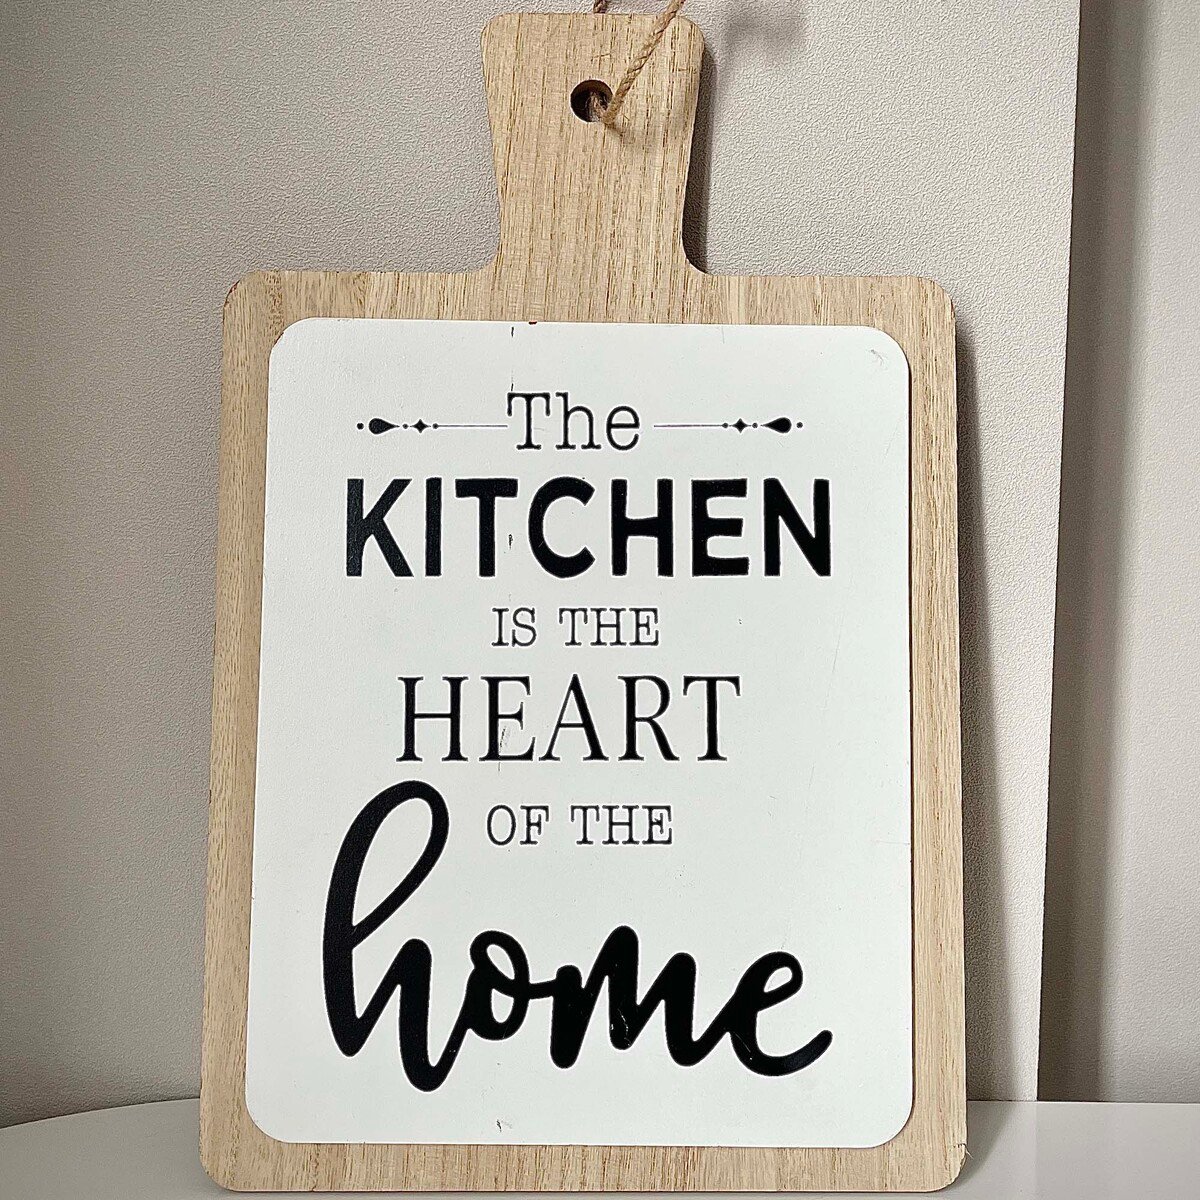 Maple Leaf Home The Kitchen Sign Wooden Wall Art Decor Hanging Board, 25.5 x 1.5 x 40 cm